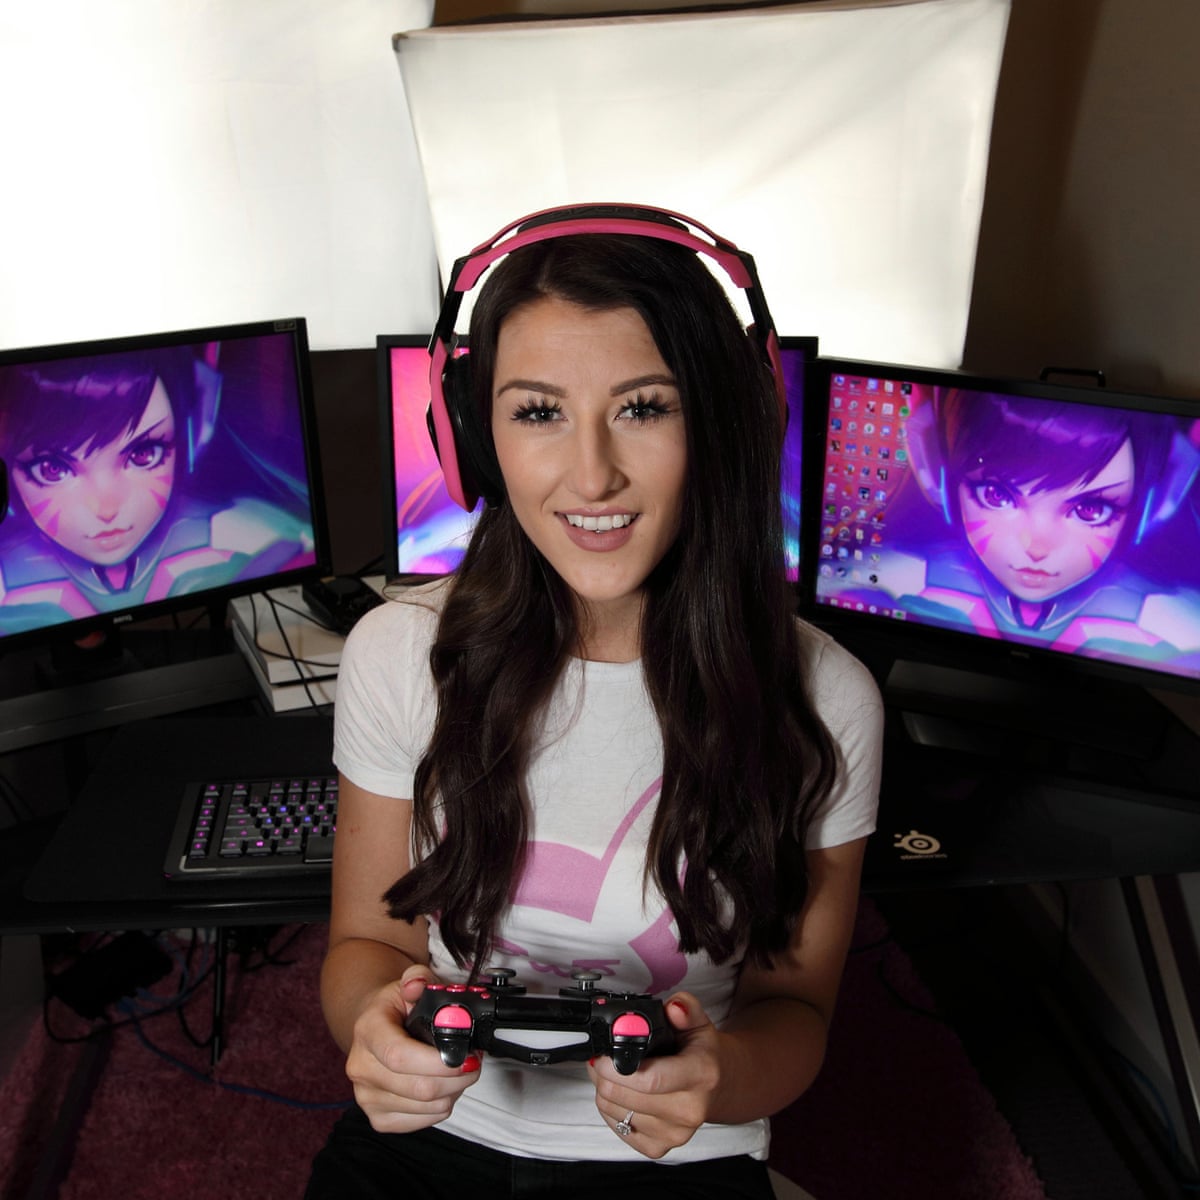 The women who make a living gaming on Twitch, Games